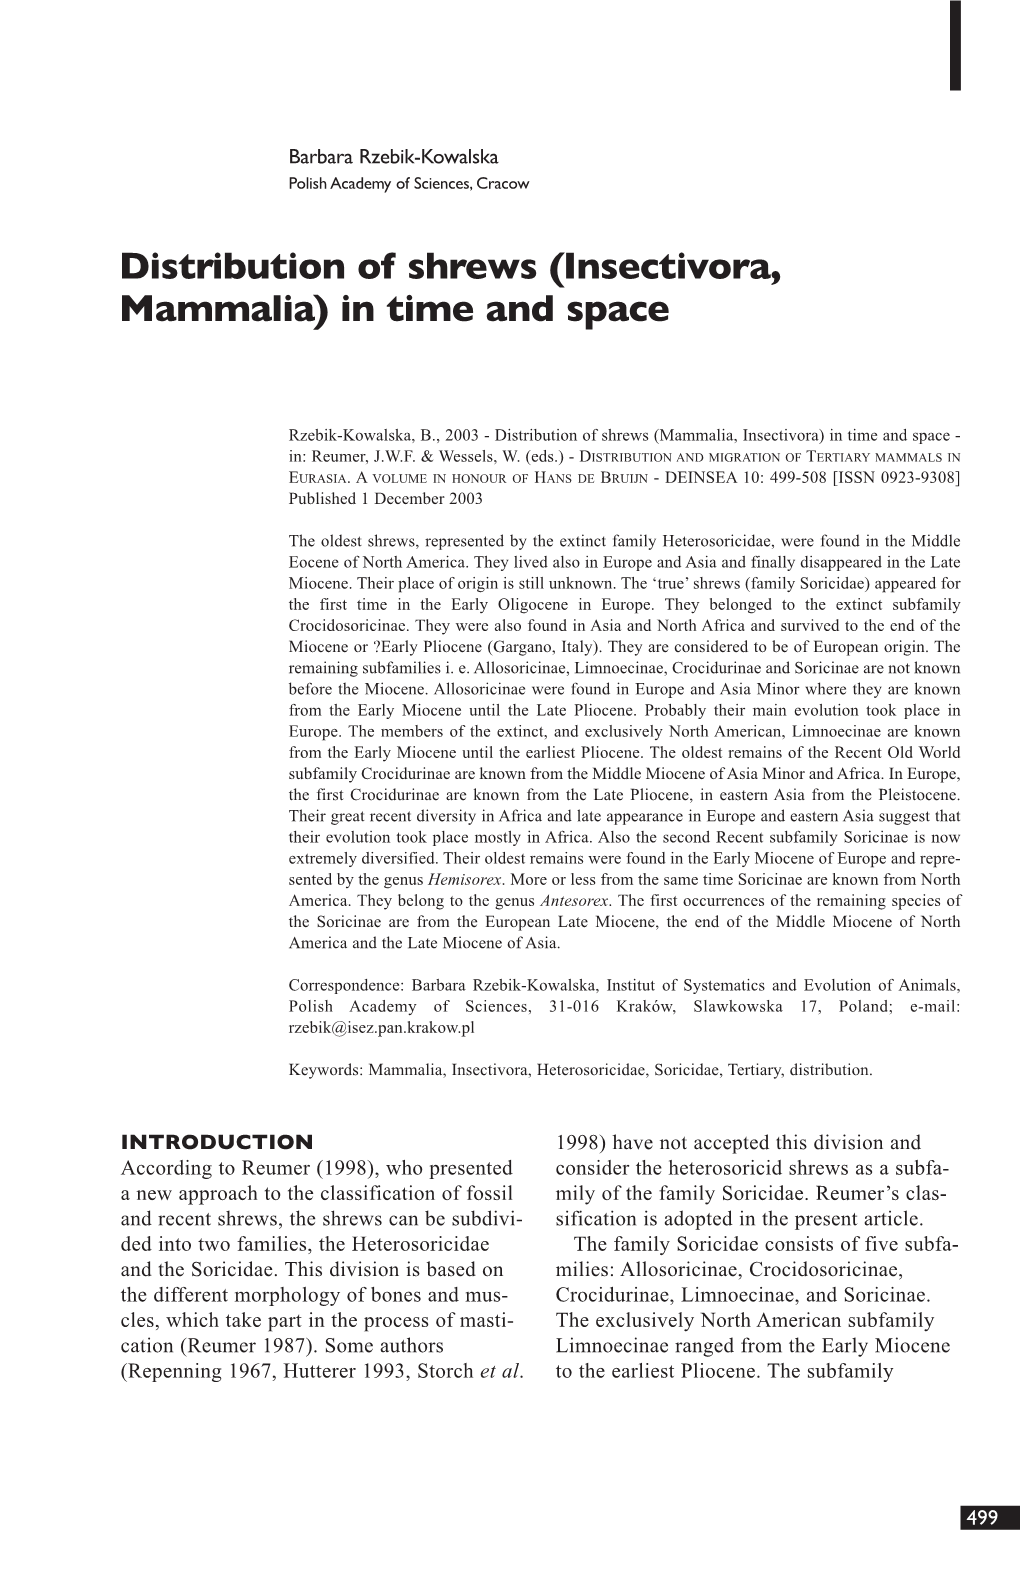 Distribution of Shrews (Insectivora, Mammalia) in Time and Space